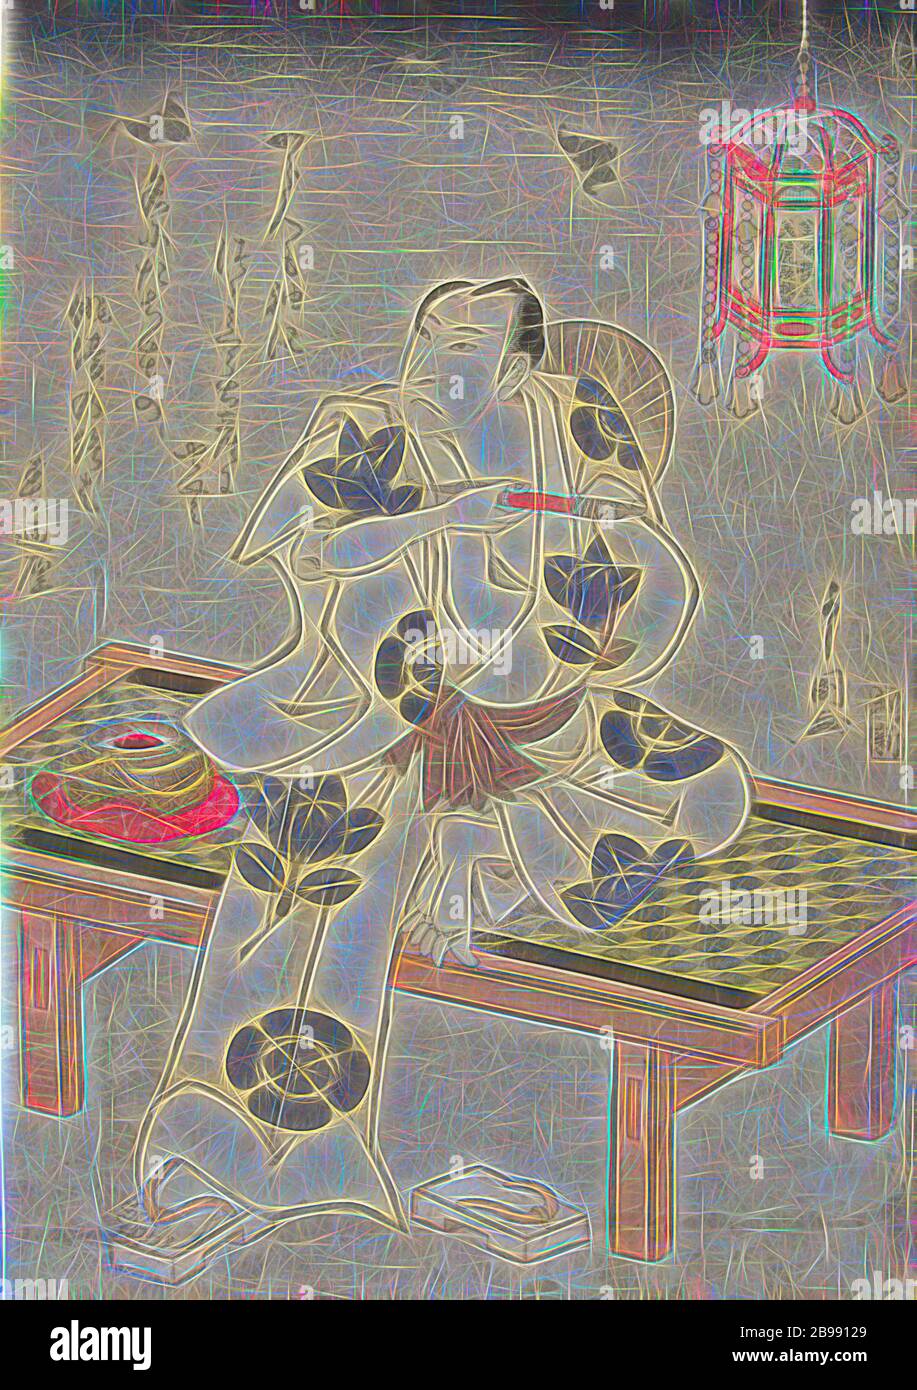 Arashi Rikan At Dusk The Actor Arashi Rikan Ii With Pipe In Right Hand Sitting On A Bench With Hanging Lantern Bats In The Background Top Left A Poem Toyokawa Yoshikuni Mentioned